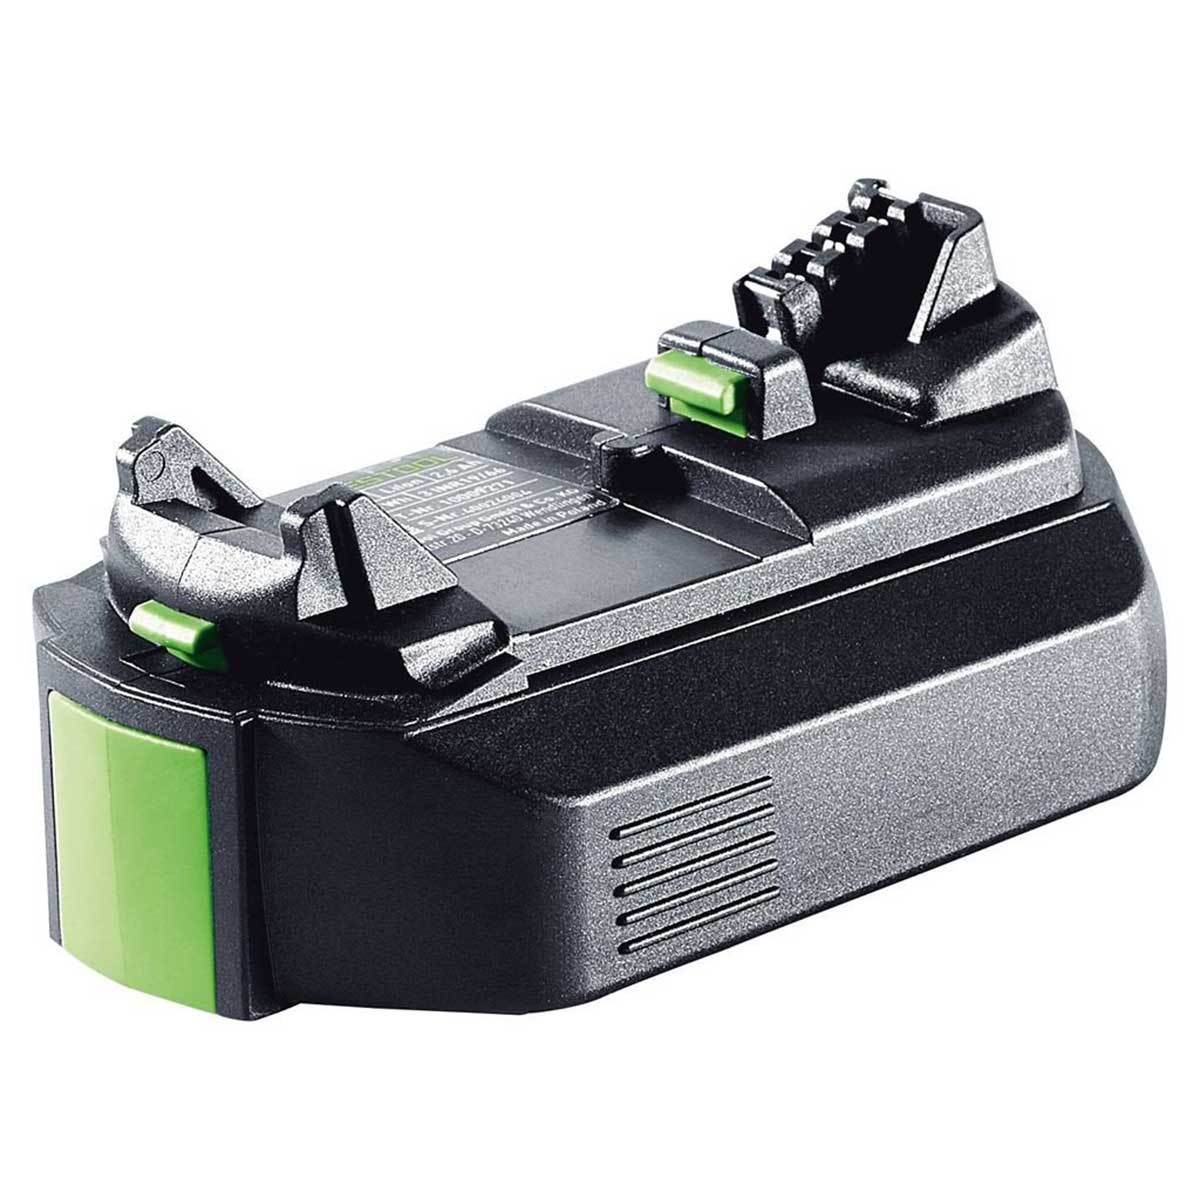 Festool 10.8V 2.6Ah Lithium Ion batter with wide base, green release button for removal from CXS or TXS cordless drill.